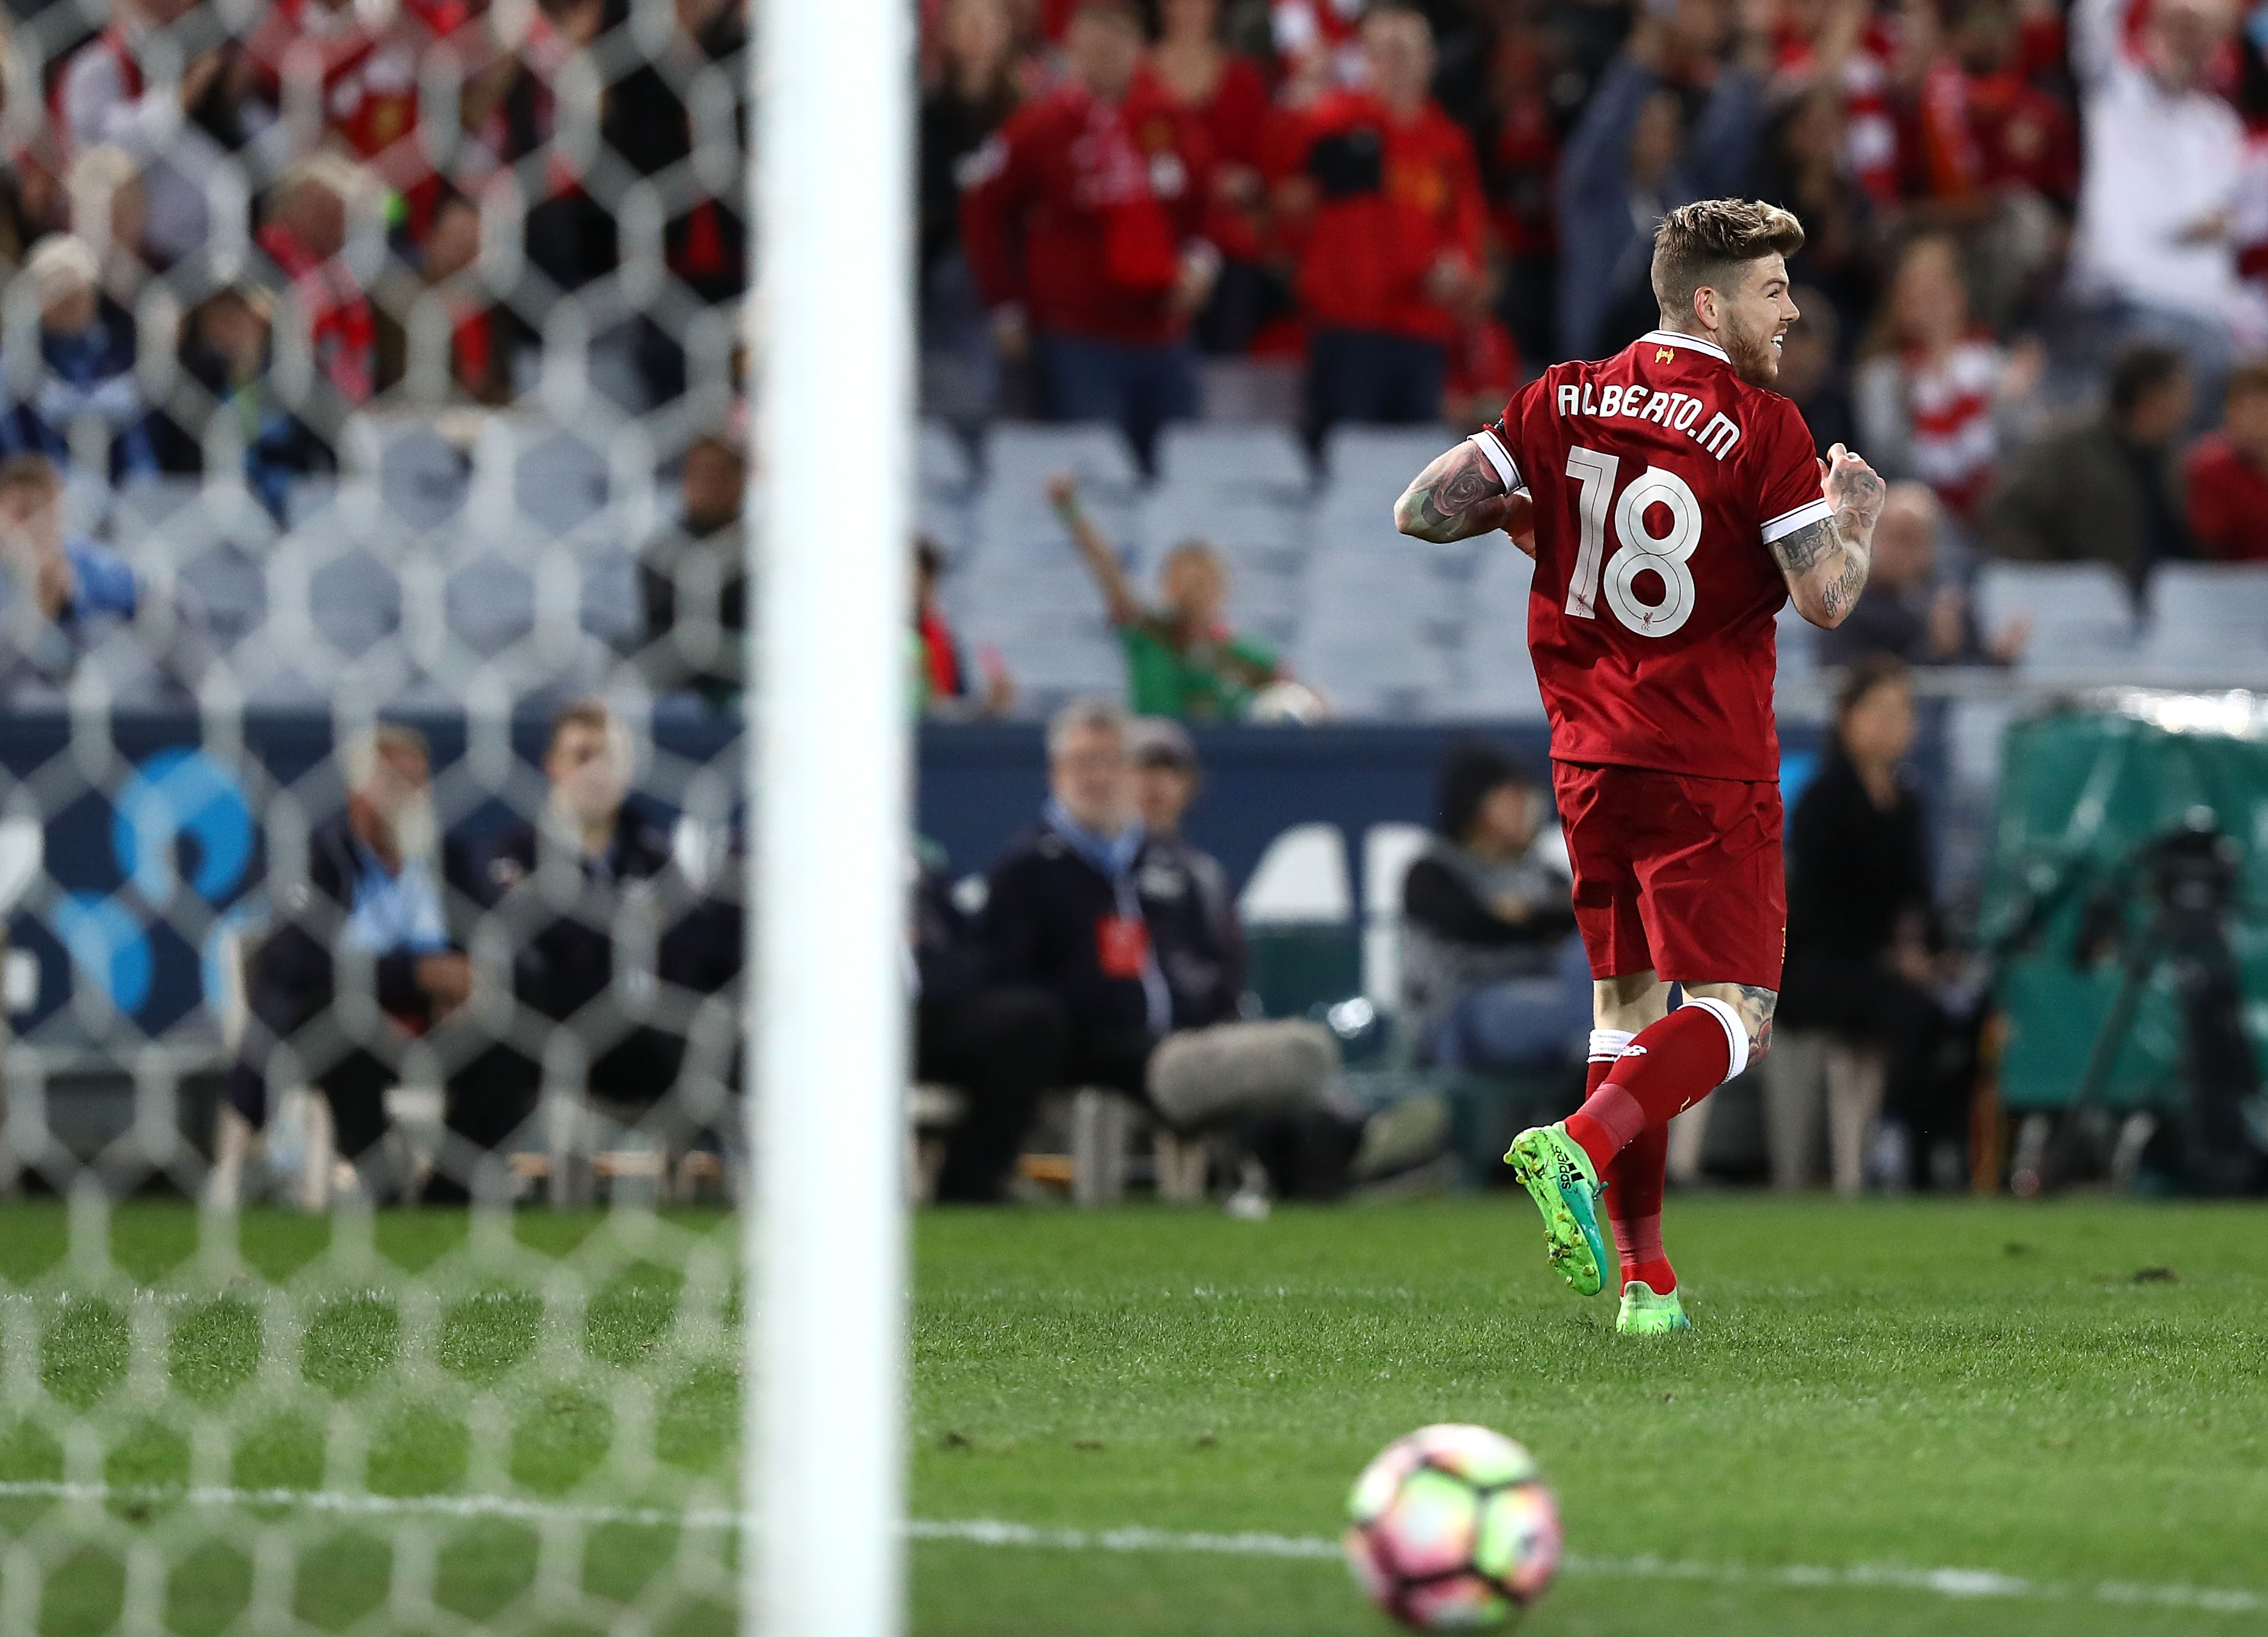 SYDNEY, AUSTRALIA - MAY 24:  Alberto Moreno of Liverpool celebrates after scoring his teams second goal during the International Friendly match between Sydney FC and Liverpool FC at ANZ Stadium on May 24, 2017 in Sydney, Australia.  (Photo by Ryan Pierse/Getty Images)